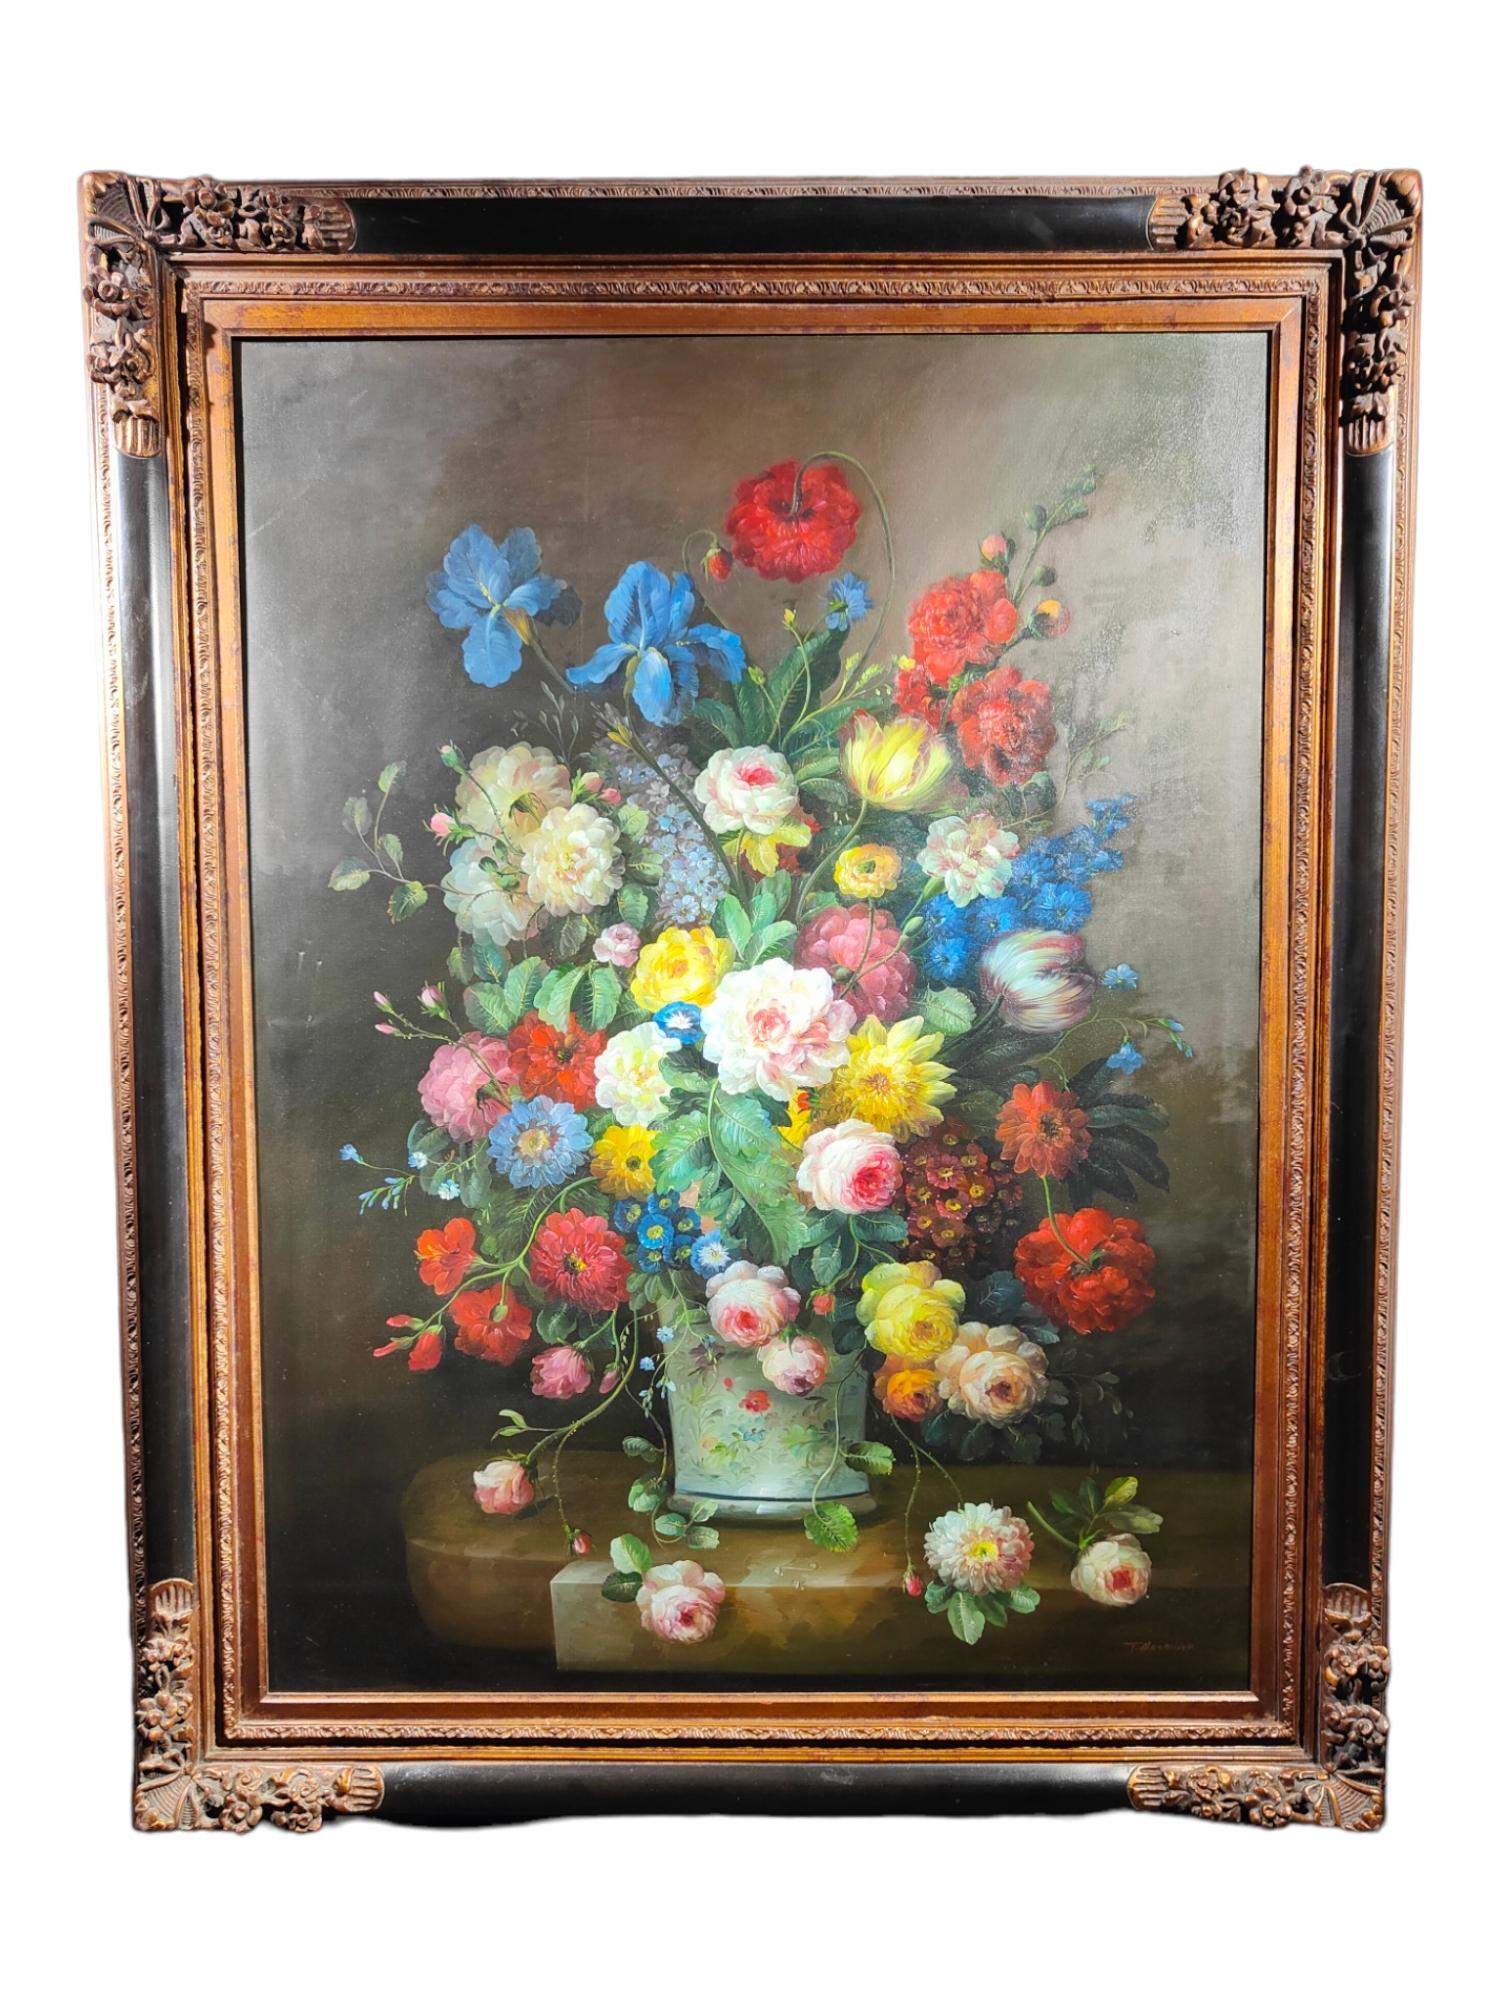 Large Oil With Flowers Signed By Terence Alexander
VERY DECORATIVE OIL ON CANVAS BY TERENCE ALEXANDER, CIRCA 1950. MEASURES 146X115 AND 122X91 CM